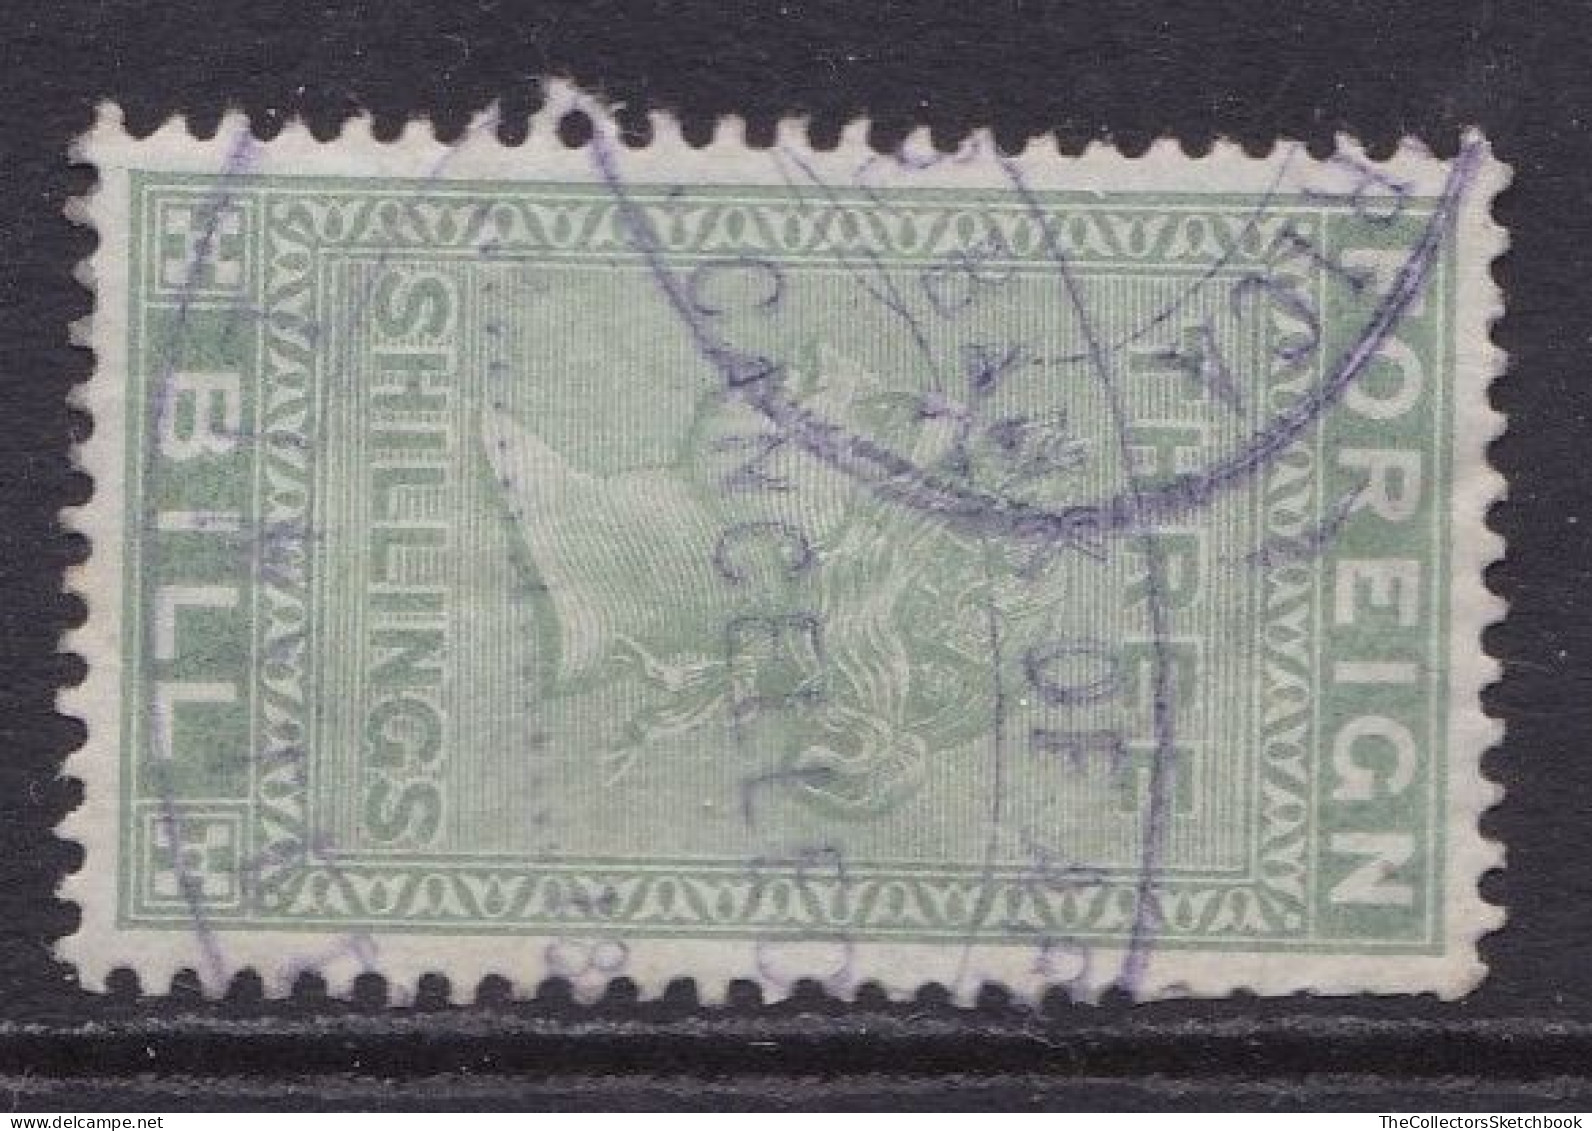 GB Fiscal/ Revenue Stamp. Foreign Bill 3/ - Green  Perf 14 Barefoot 92 - Fiscali